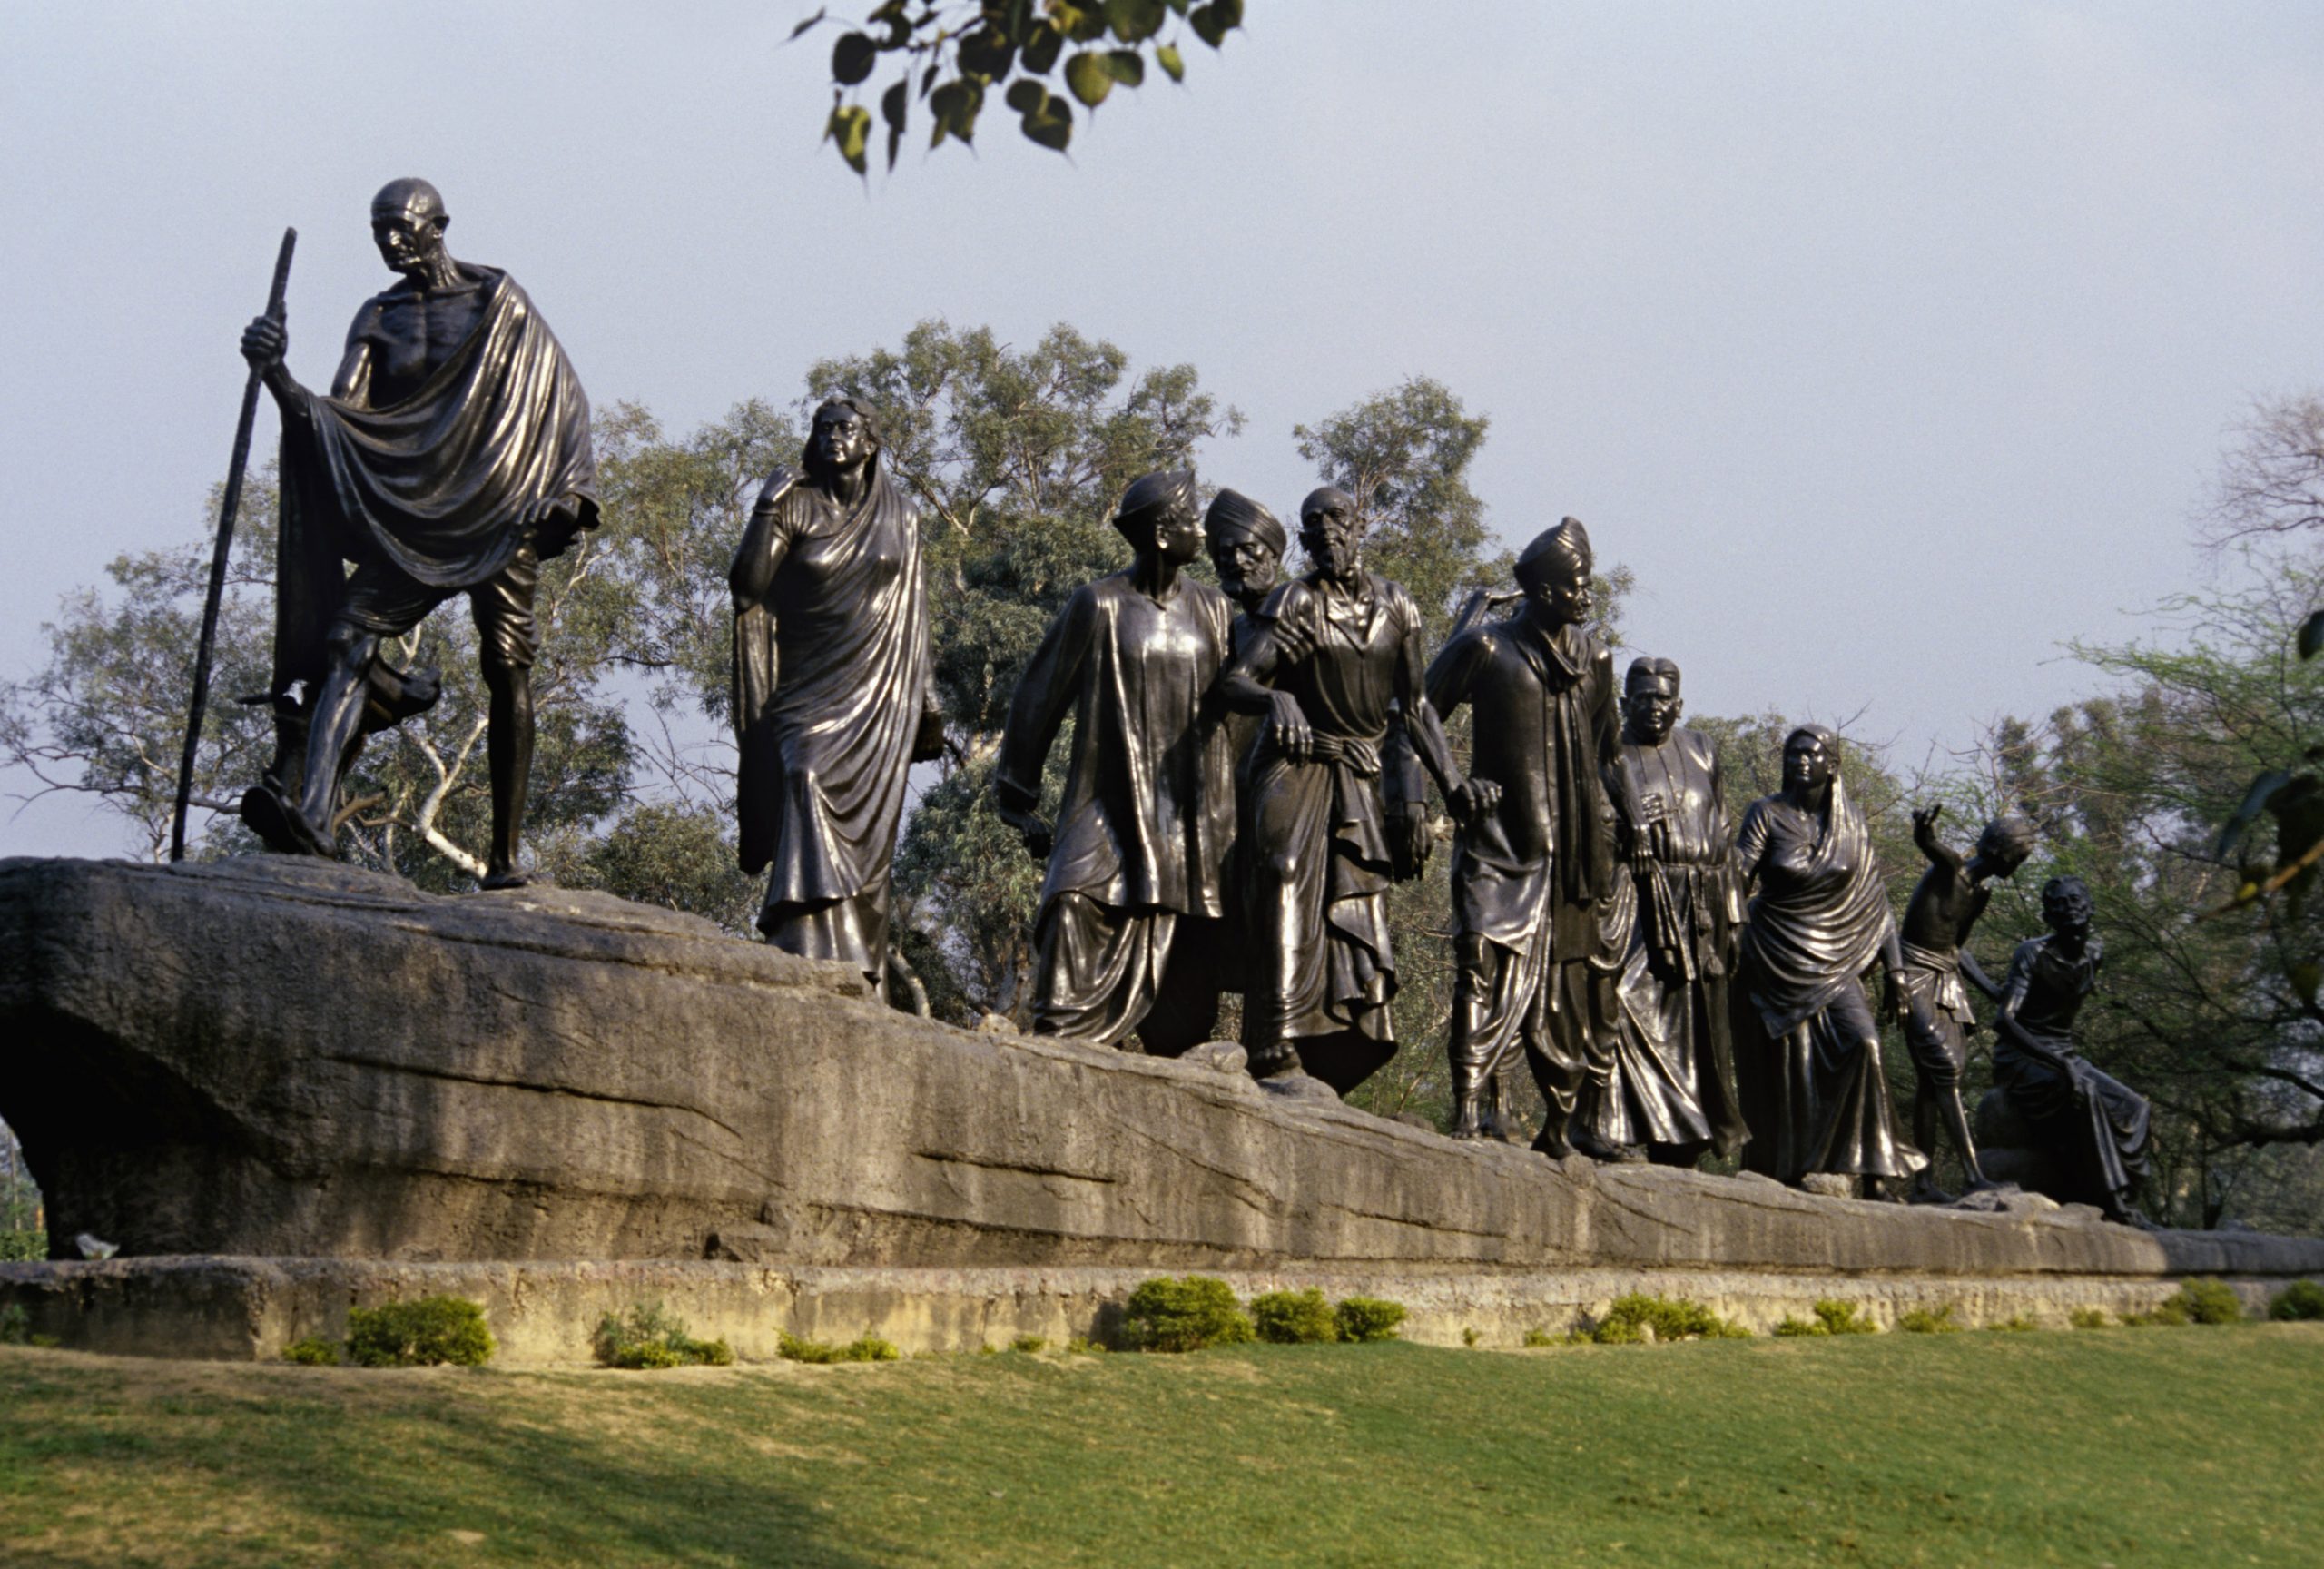 Delhi’s statues tell a tale of missing women icons